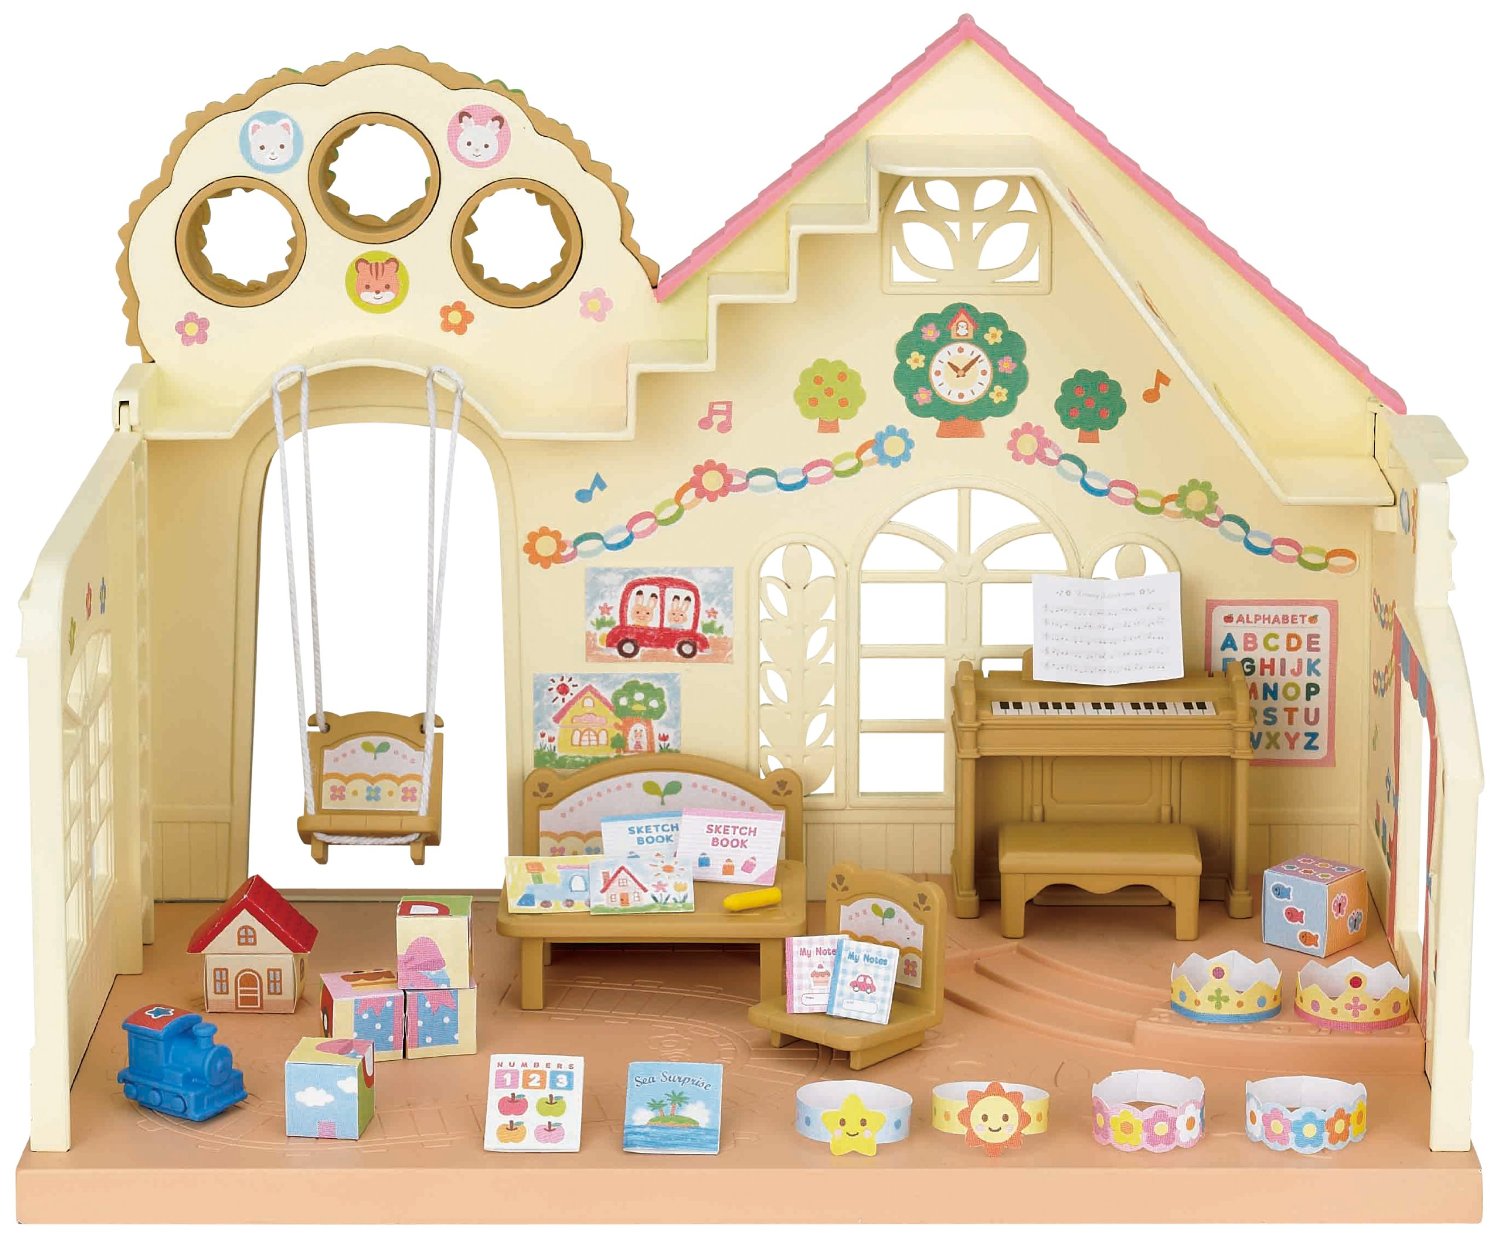 sylvanian families country clinic gift set